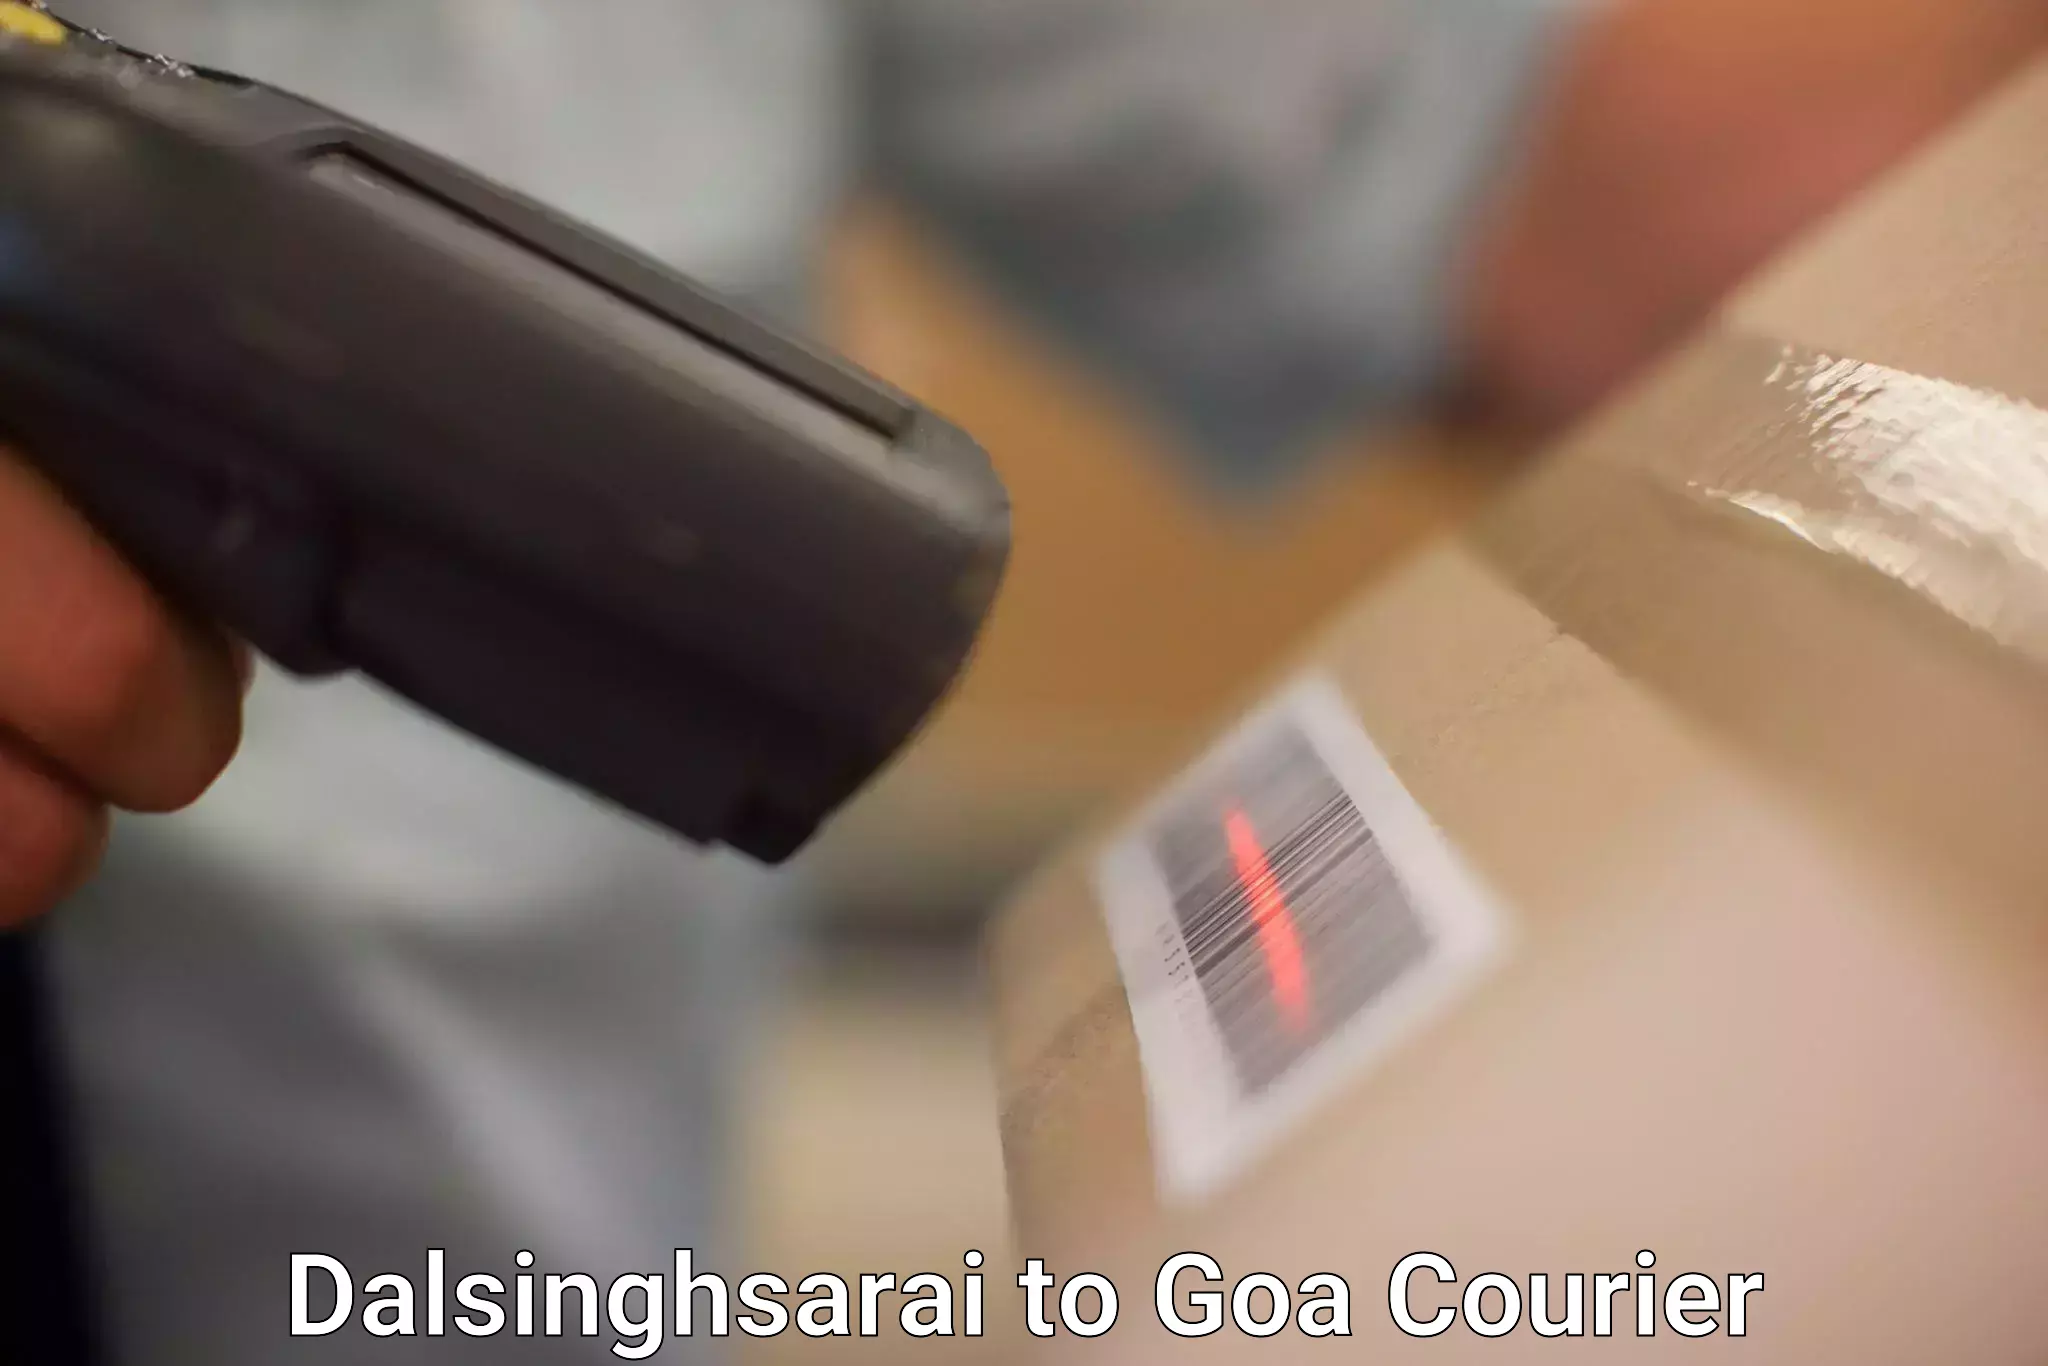 Flexible delivery scheduling Dalsinghsarai to IIT Goa